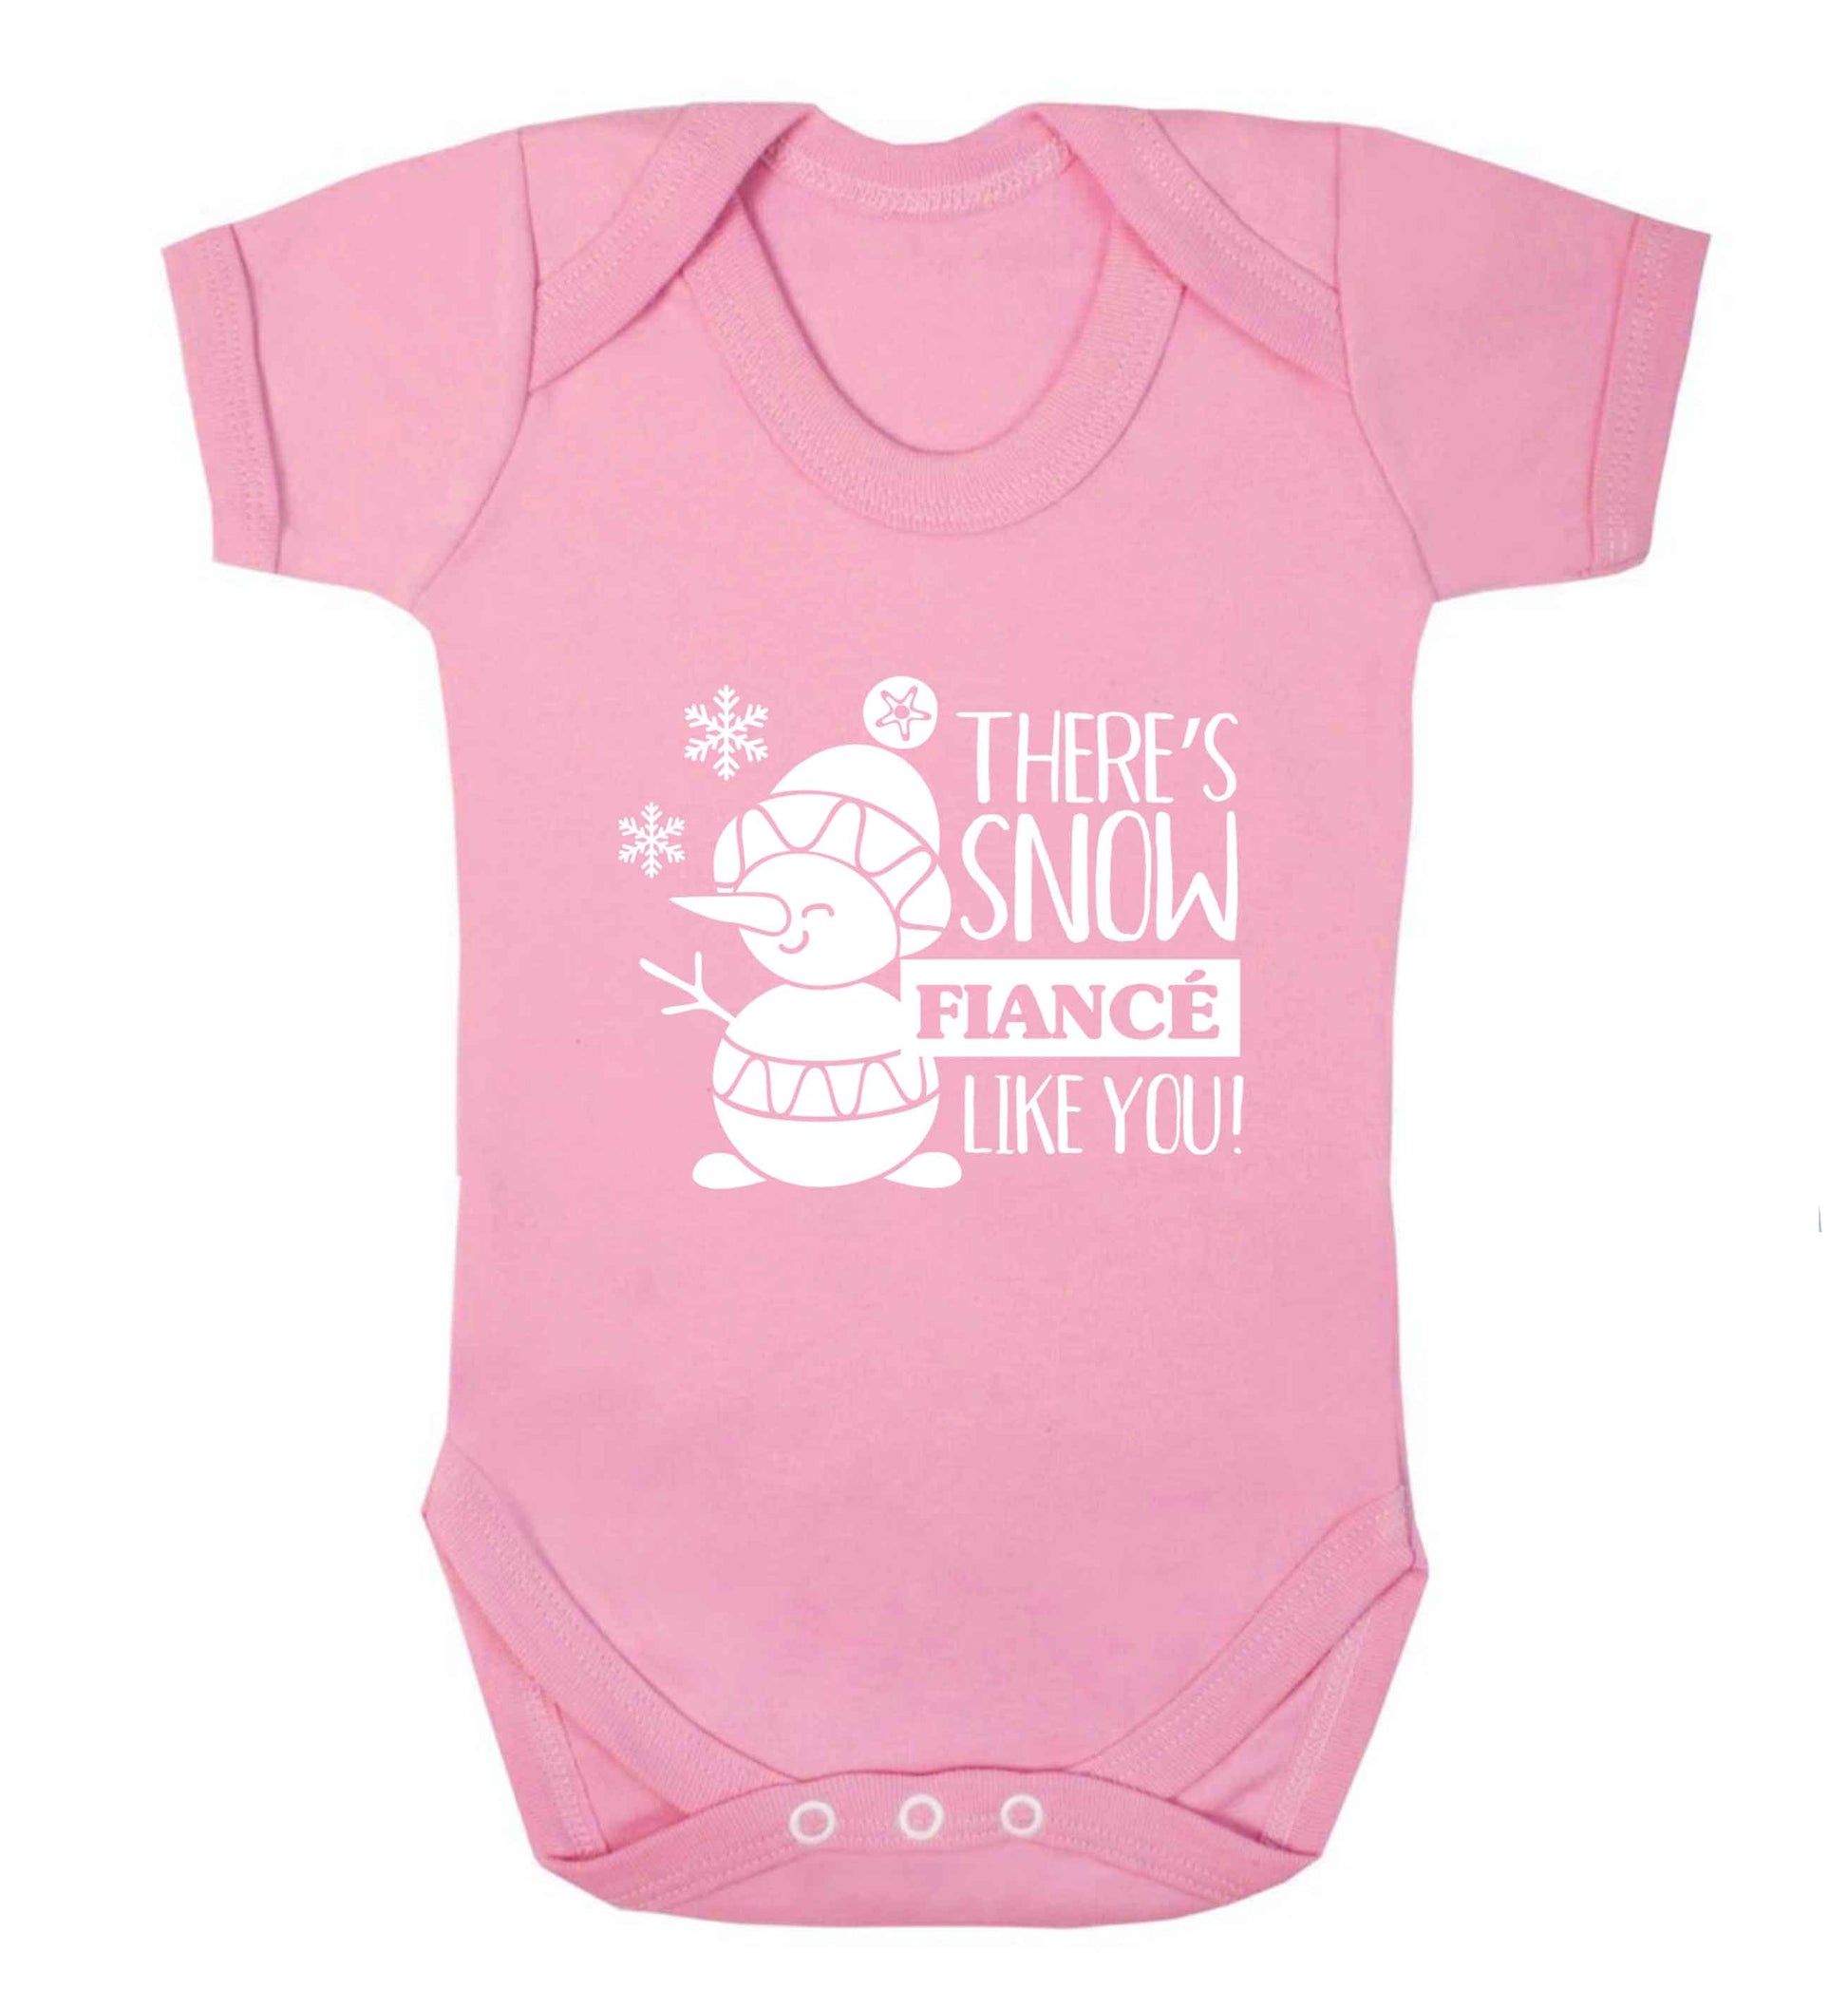 There's snow fiance like you baby vest pale pink 18-24 months